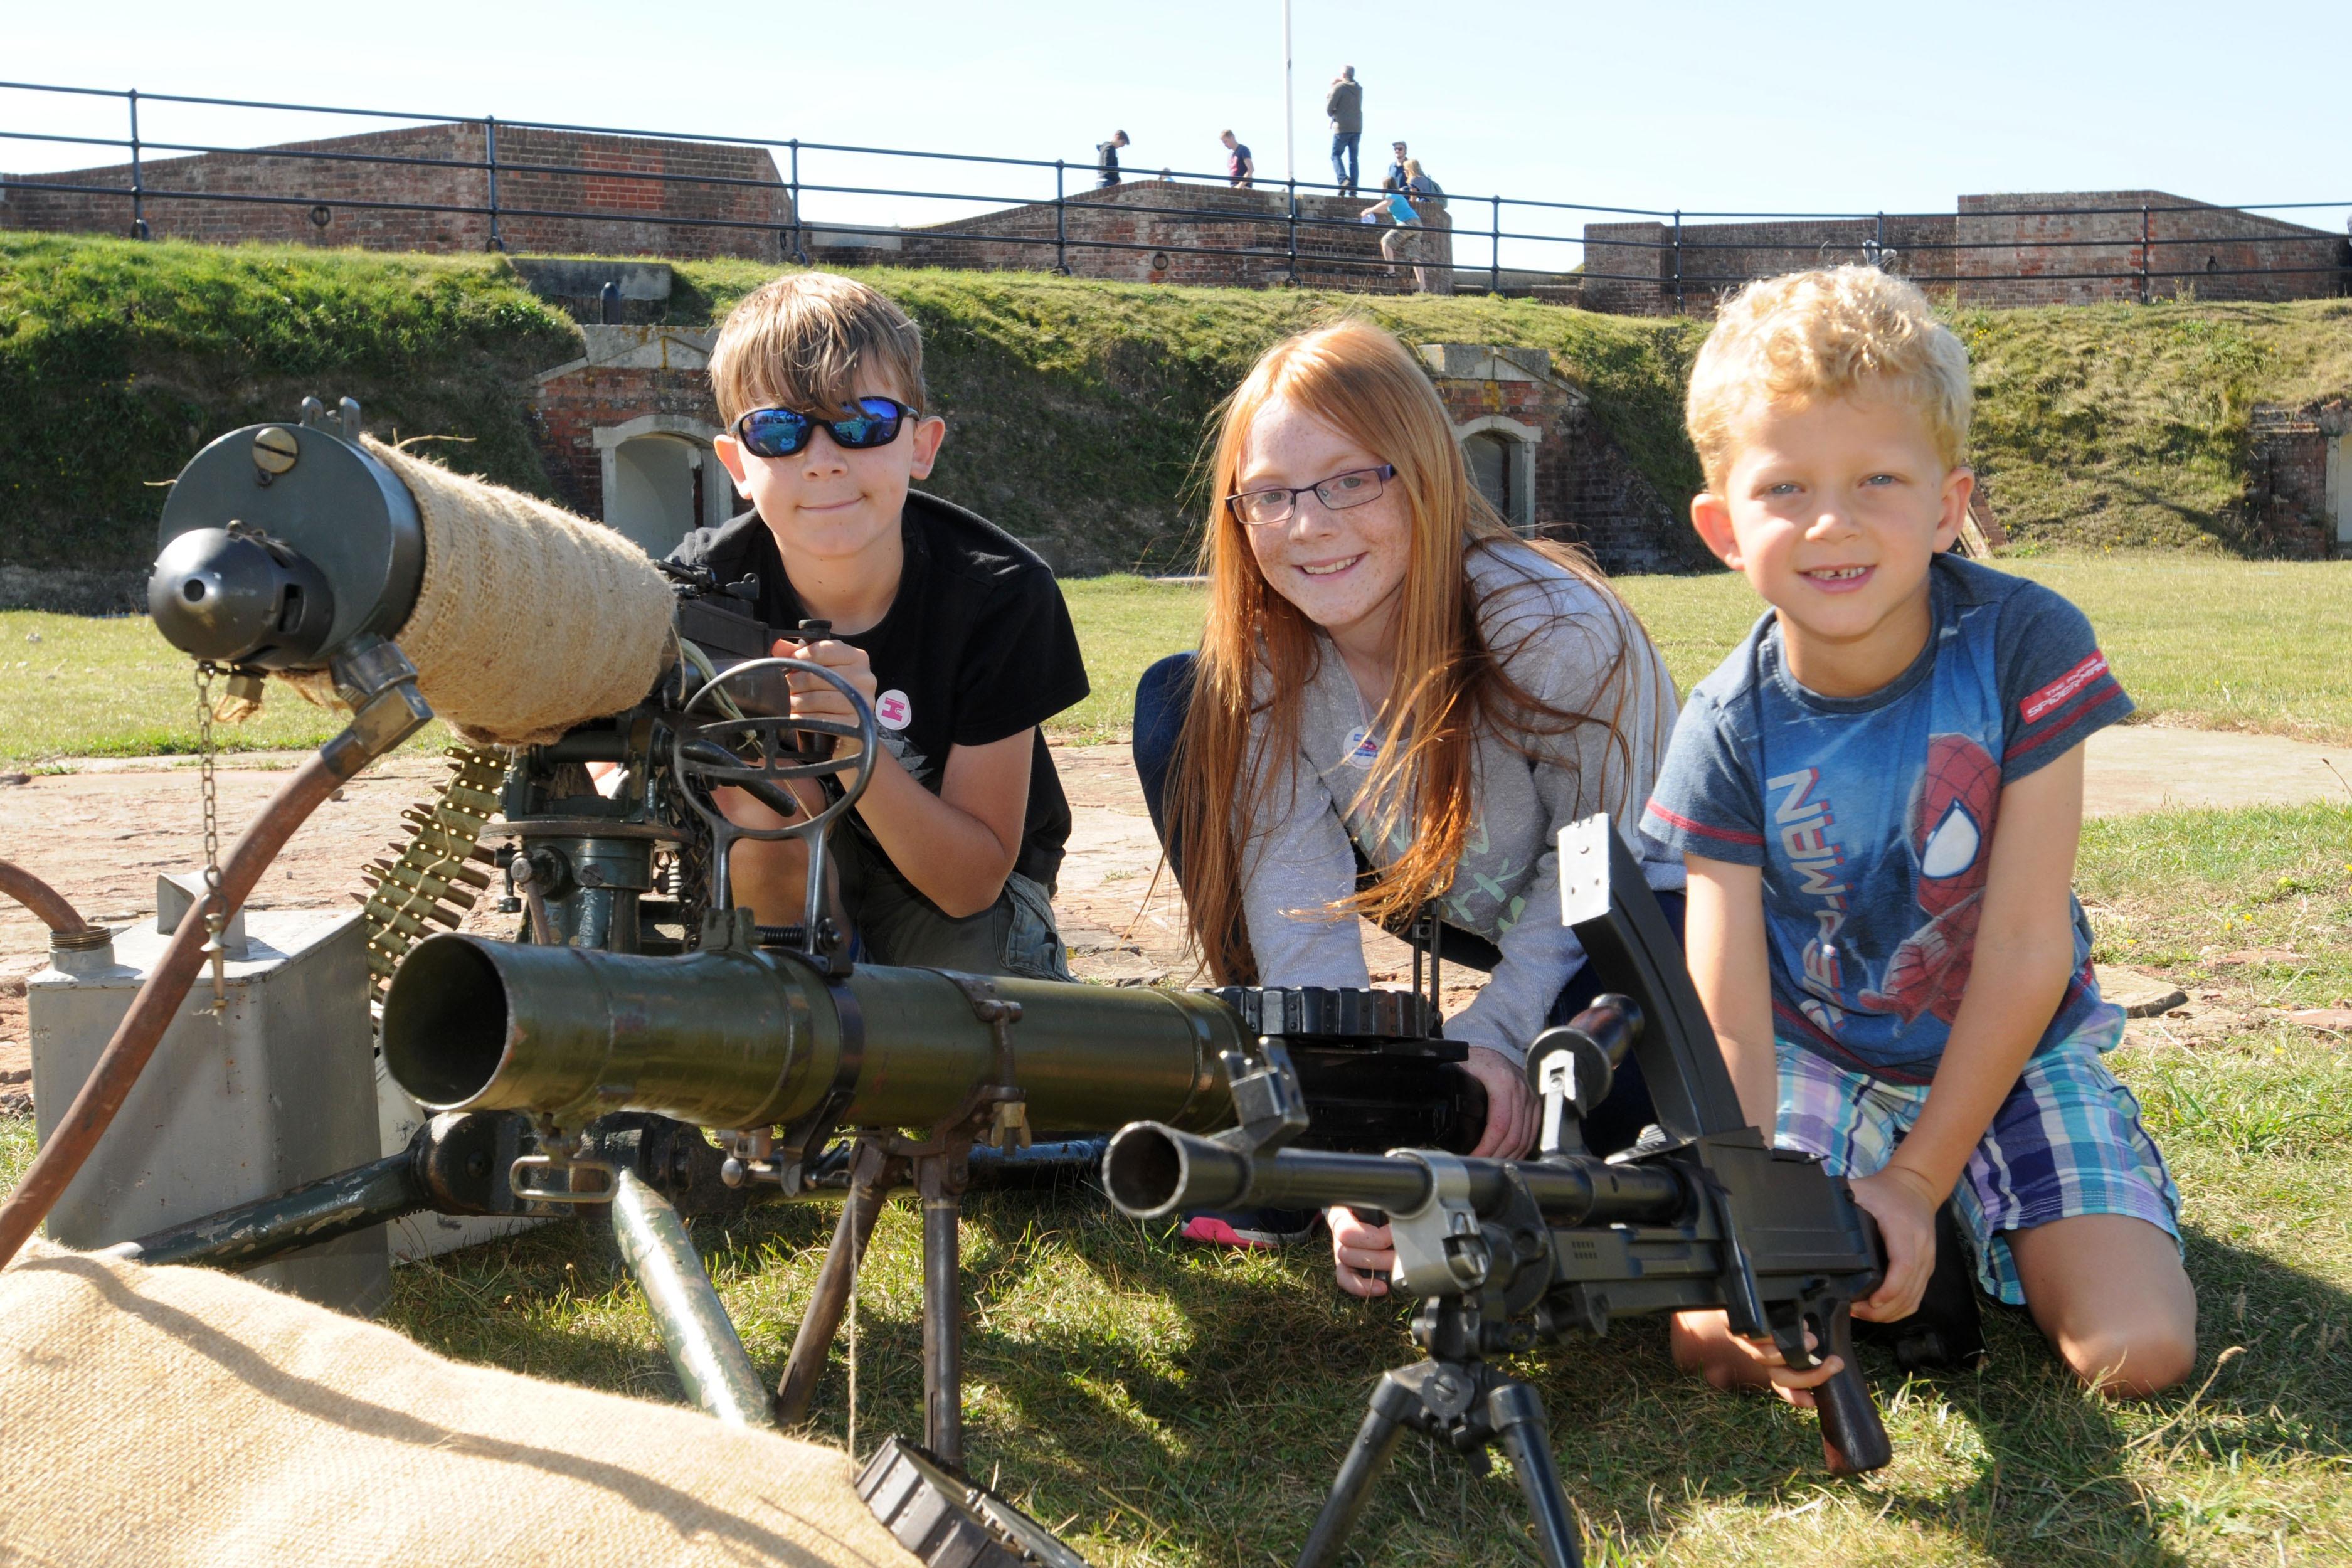 Shoreham Fort has its Heritage Open Day on Sunday, September 20